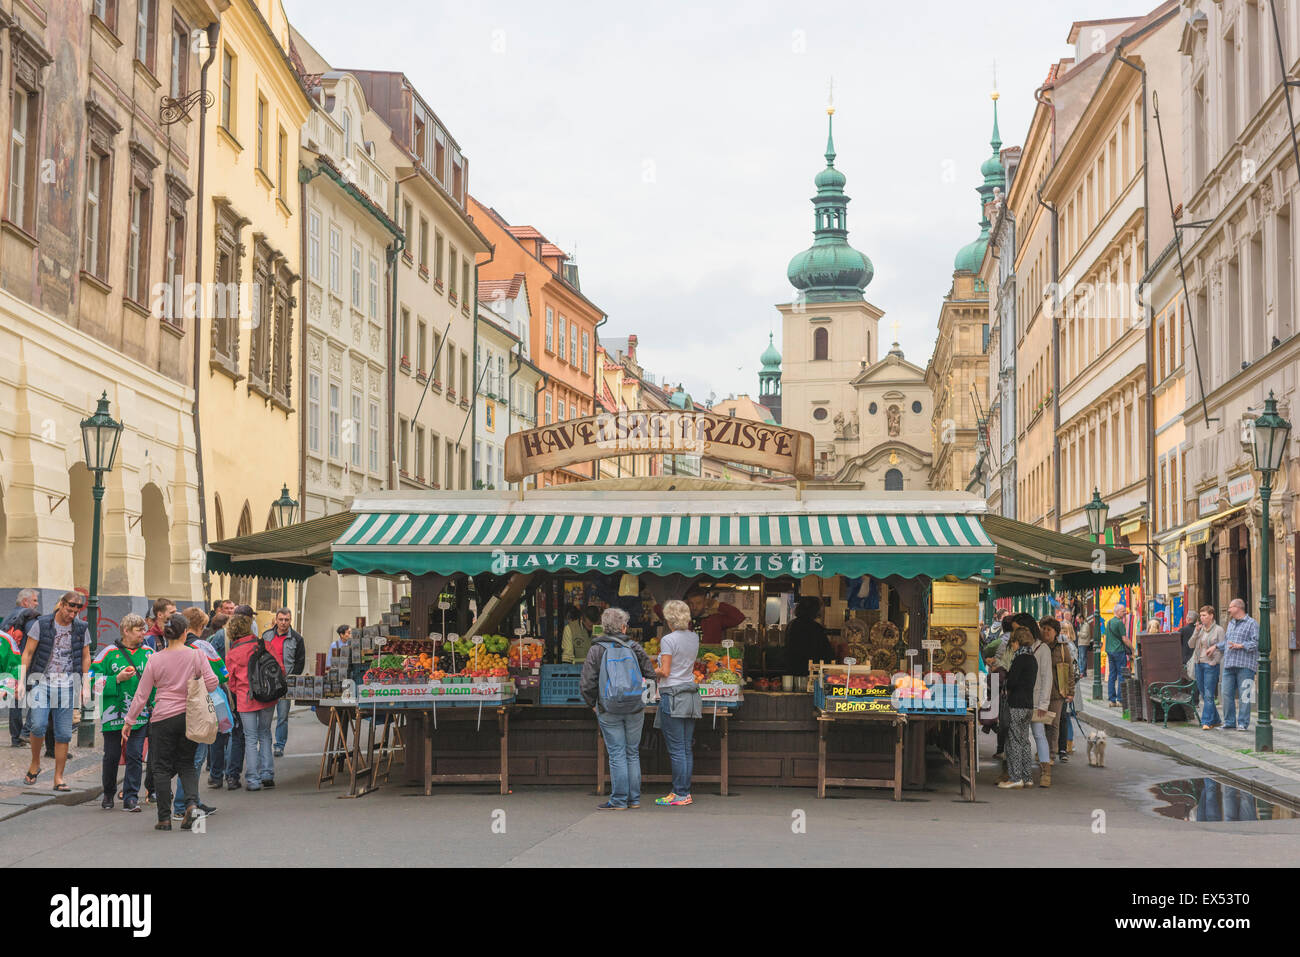 Prague market, view of tourists browsing stalls in Prague's largest market - the Havelske - in the Stare Mesto district of the city, Czech Republic. Stock Photo